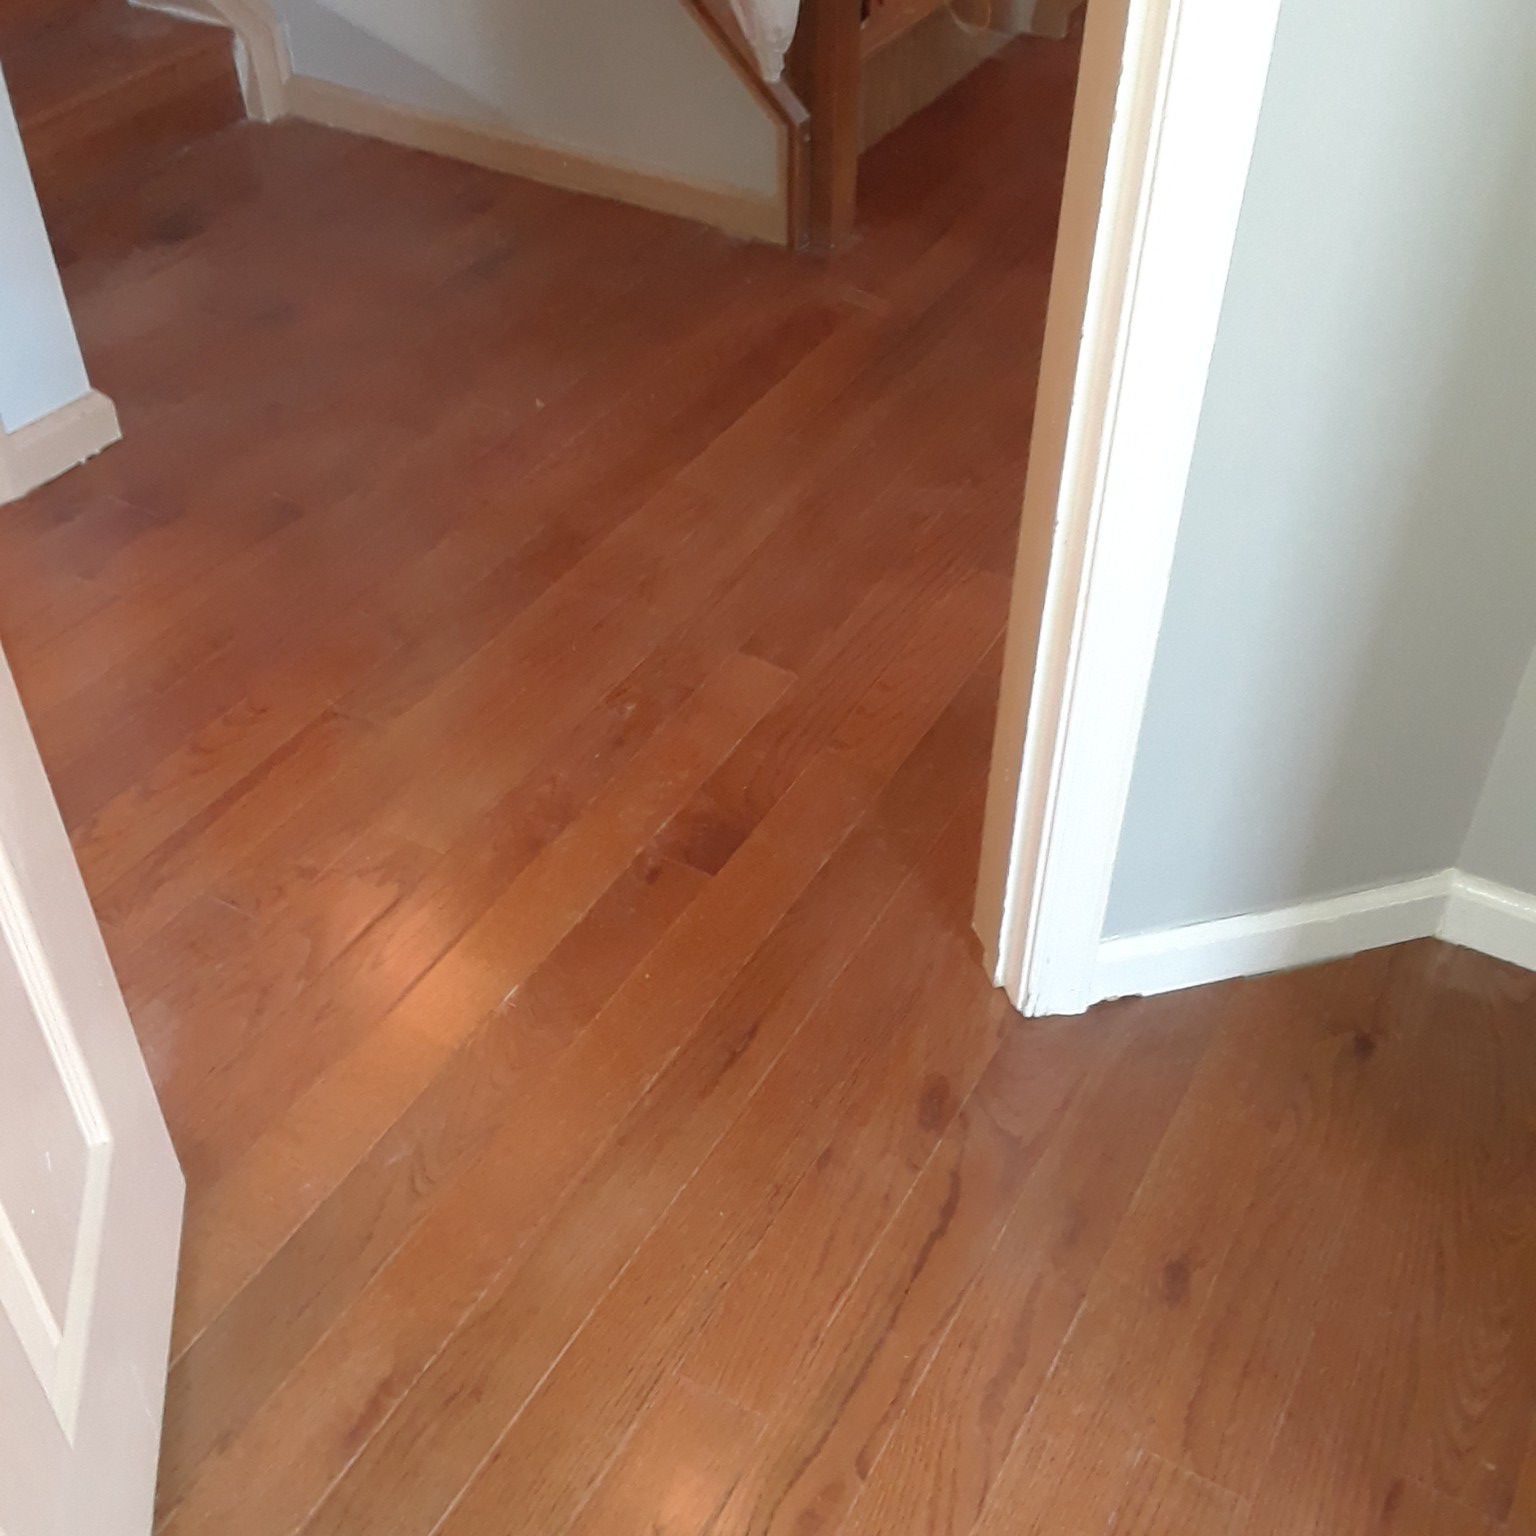 {contact info removed}wooden floor works are very good price